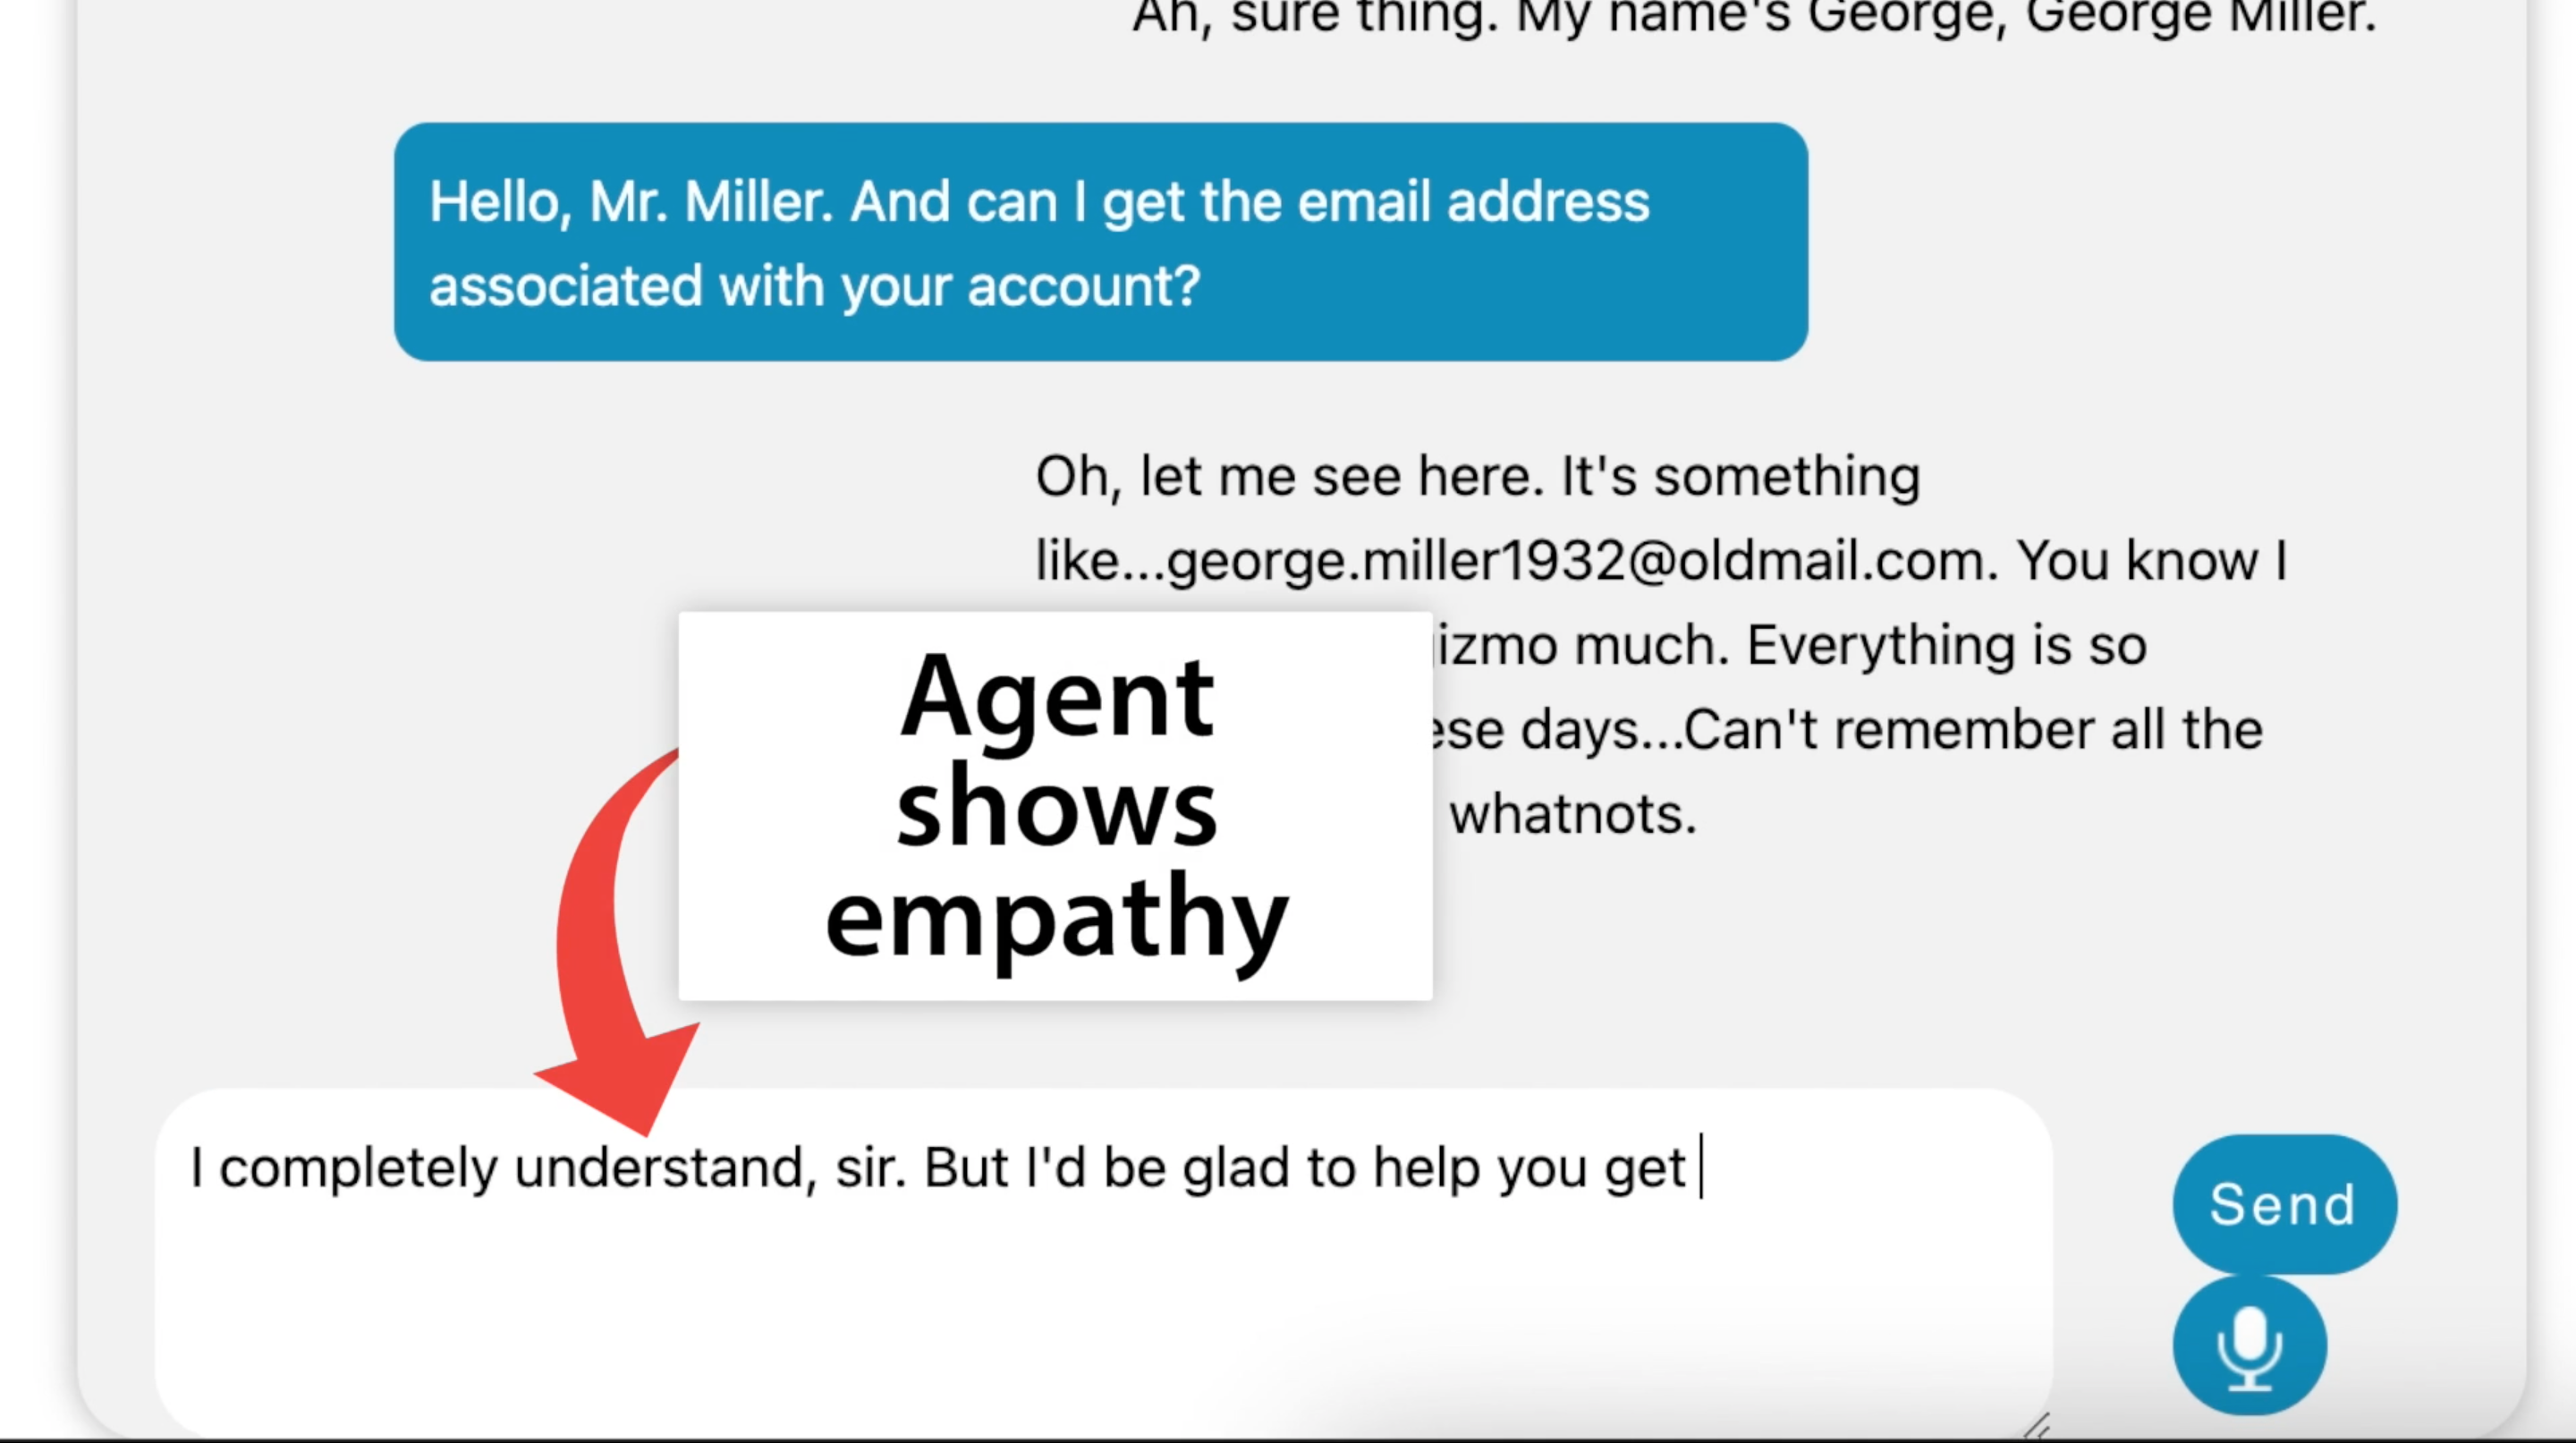 The agent must show empathy.